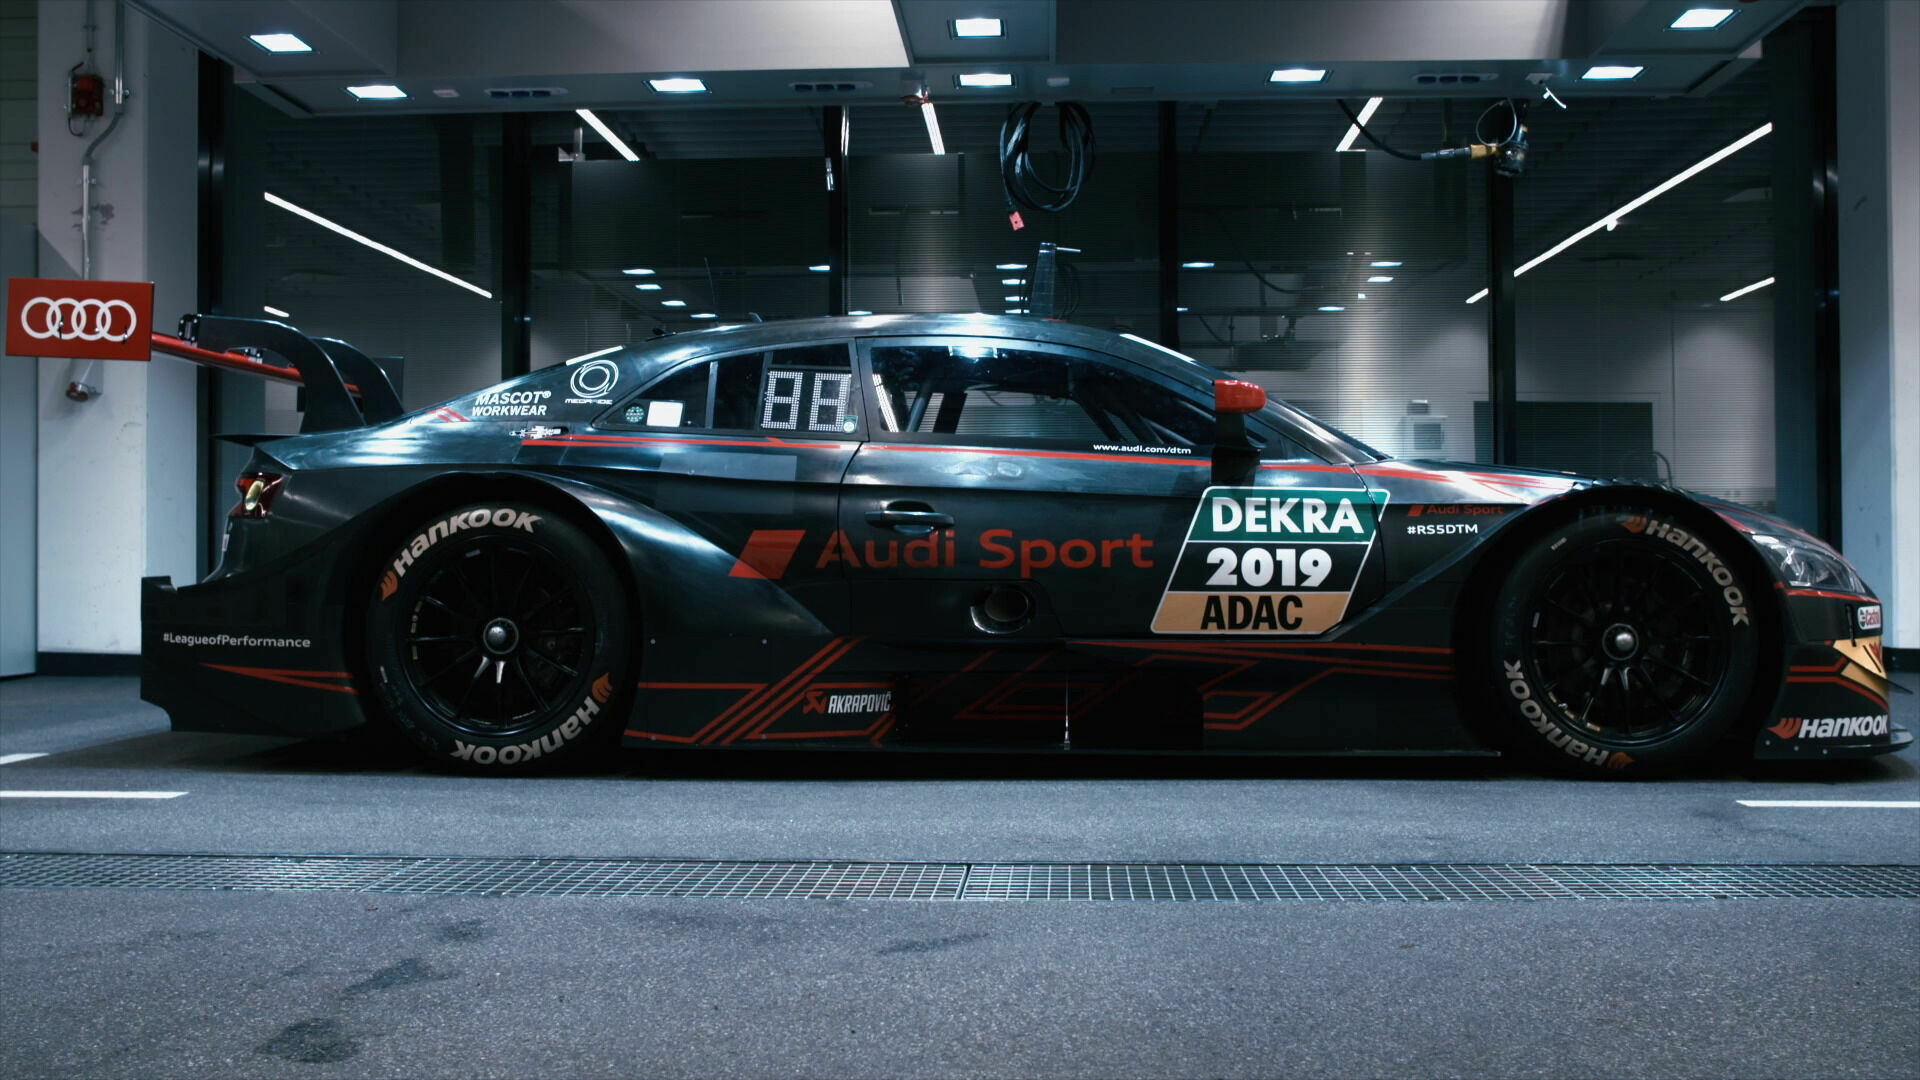 A new era in the DTM: The turbo is back